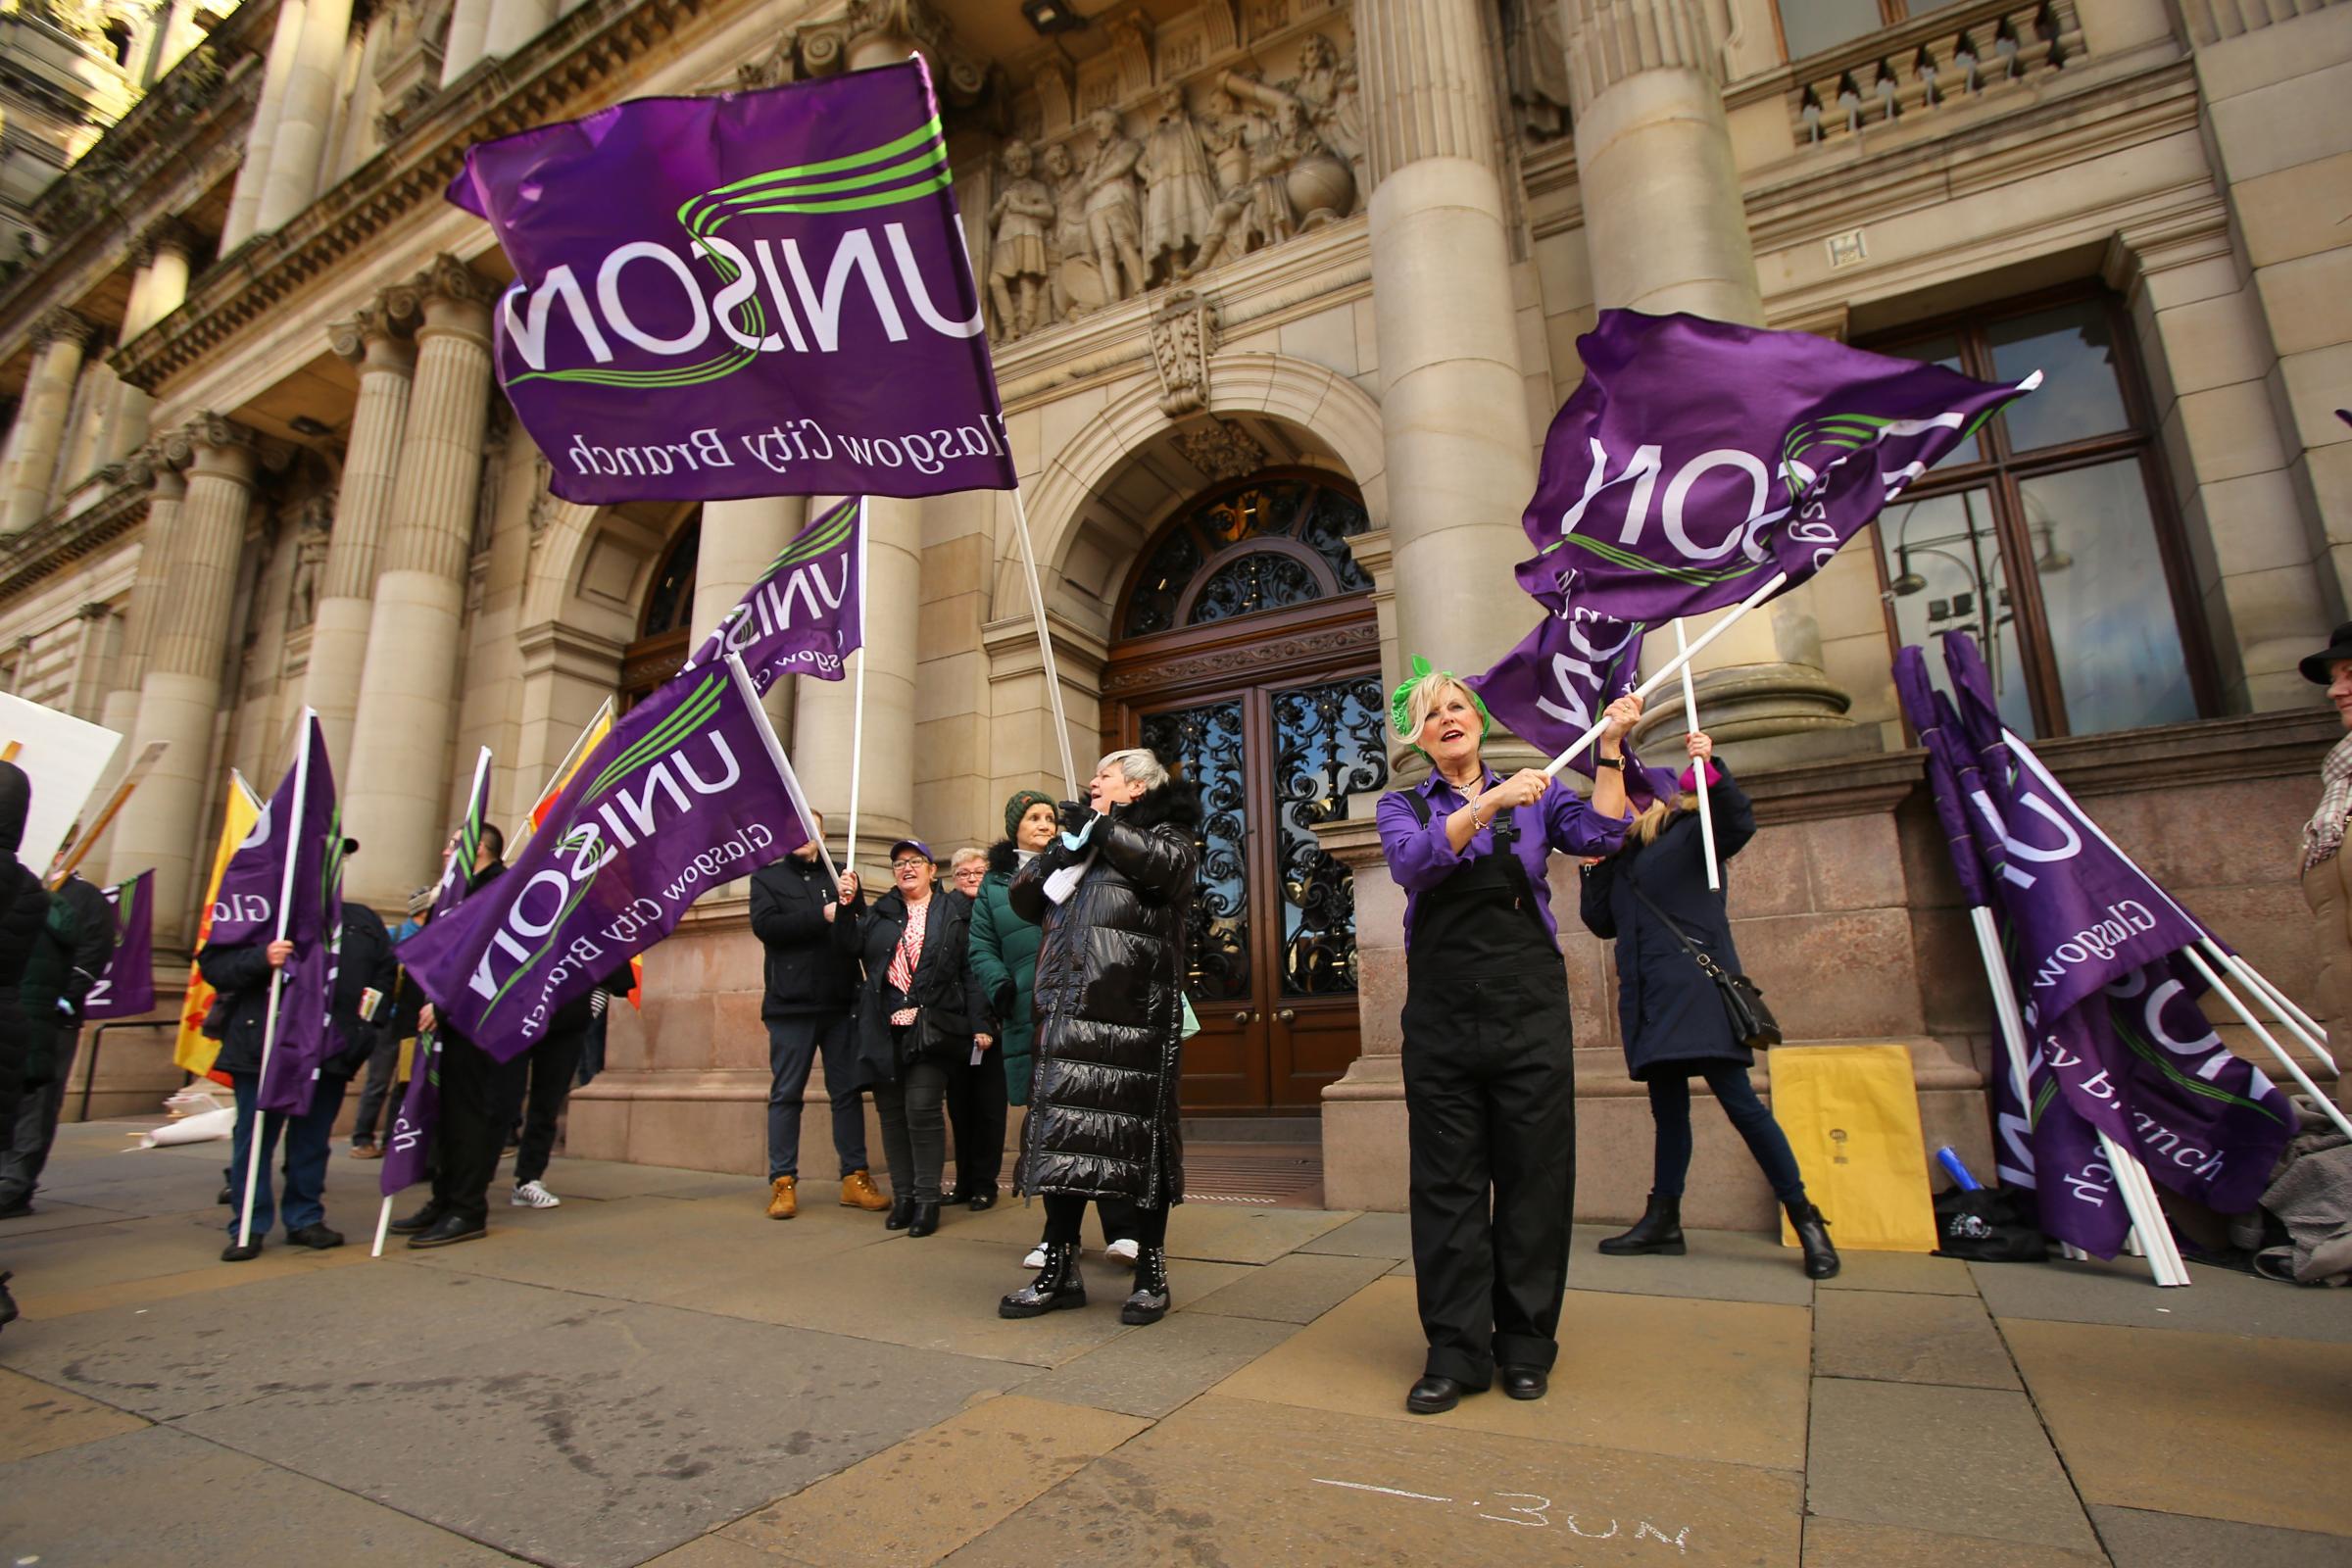 Equal pay compensation dispute protest at Glasgow City Chambers. Photograph by Colin Mearns.